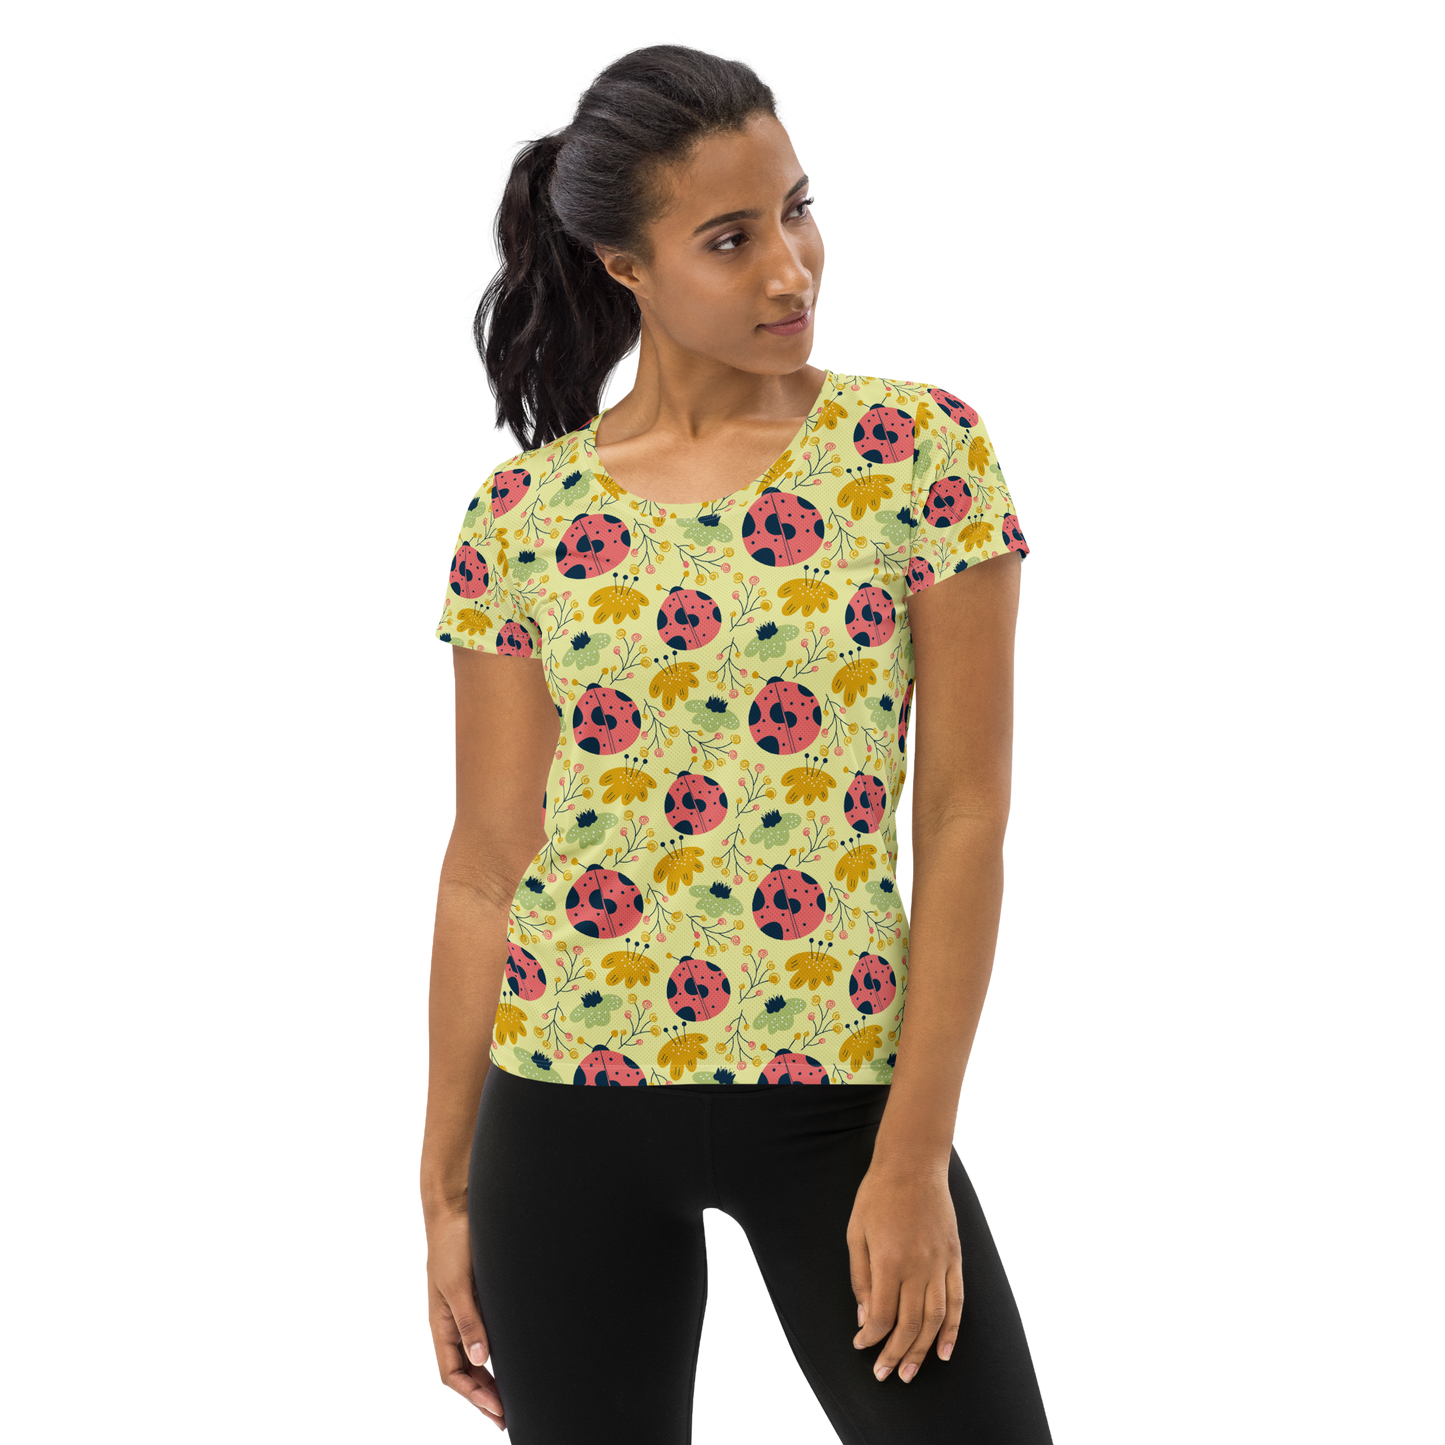 Scandinavian Spring Floral | Seamless Patterns | All-Over Print Women's Athletic T-Shirt - #9